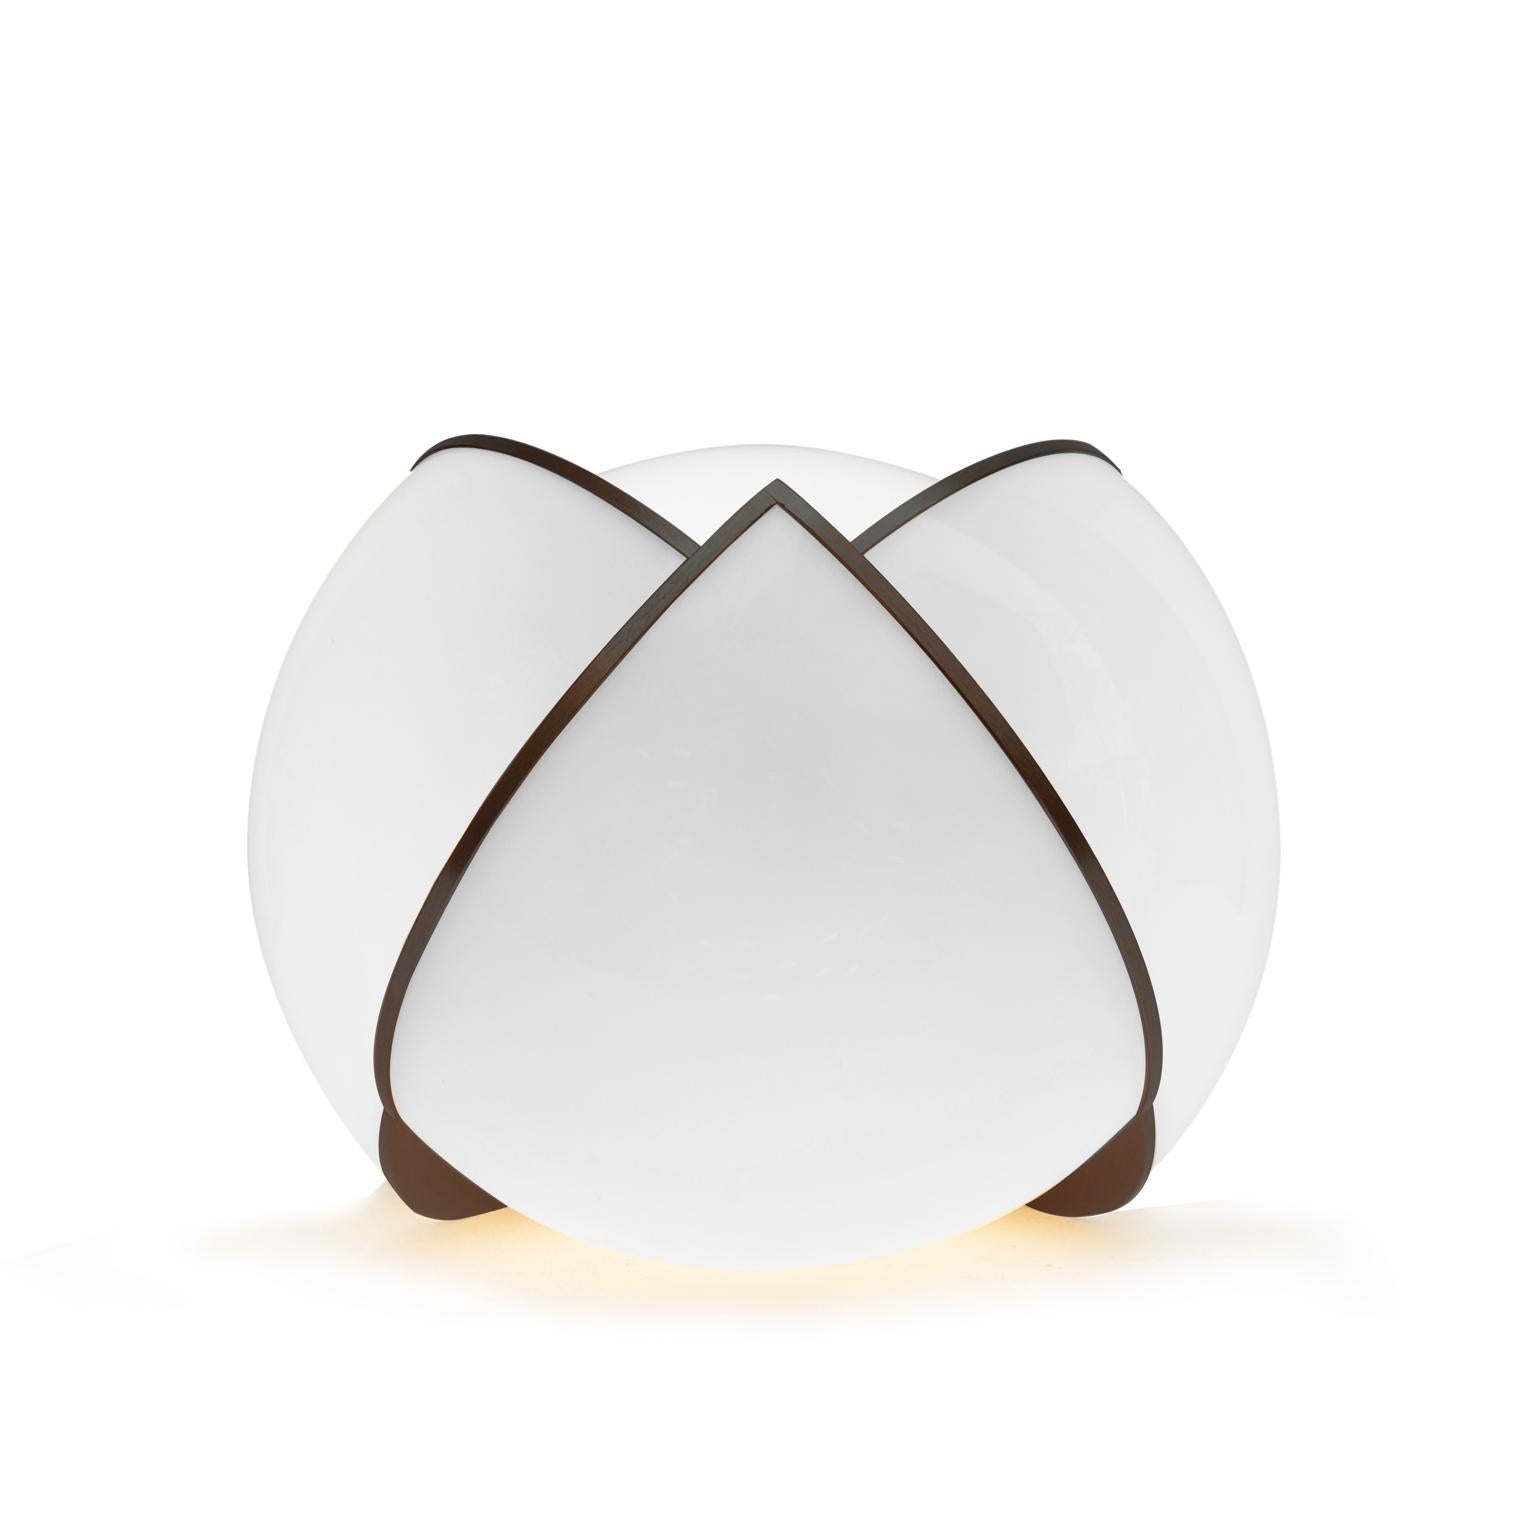 The deconstruction and reconfiguration of pure geometric form has inspired much of designer Lara Bohinc’s work and here results in her very first lighting design. The collision theme has also featured in previous Bohinc work,
in both jewelry and